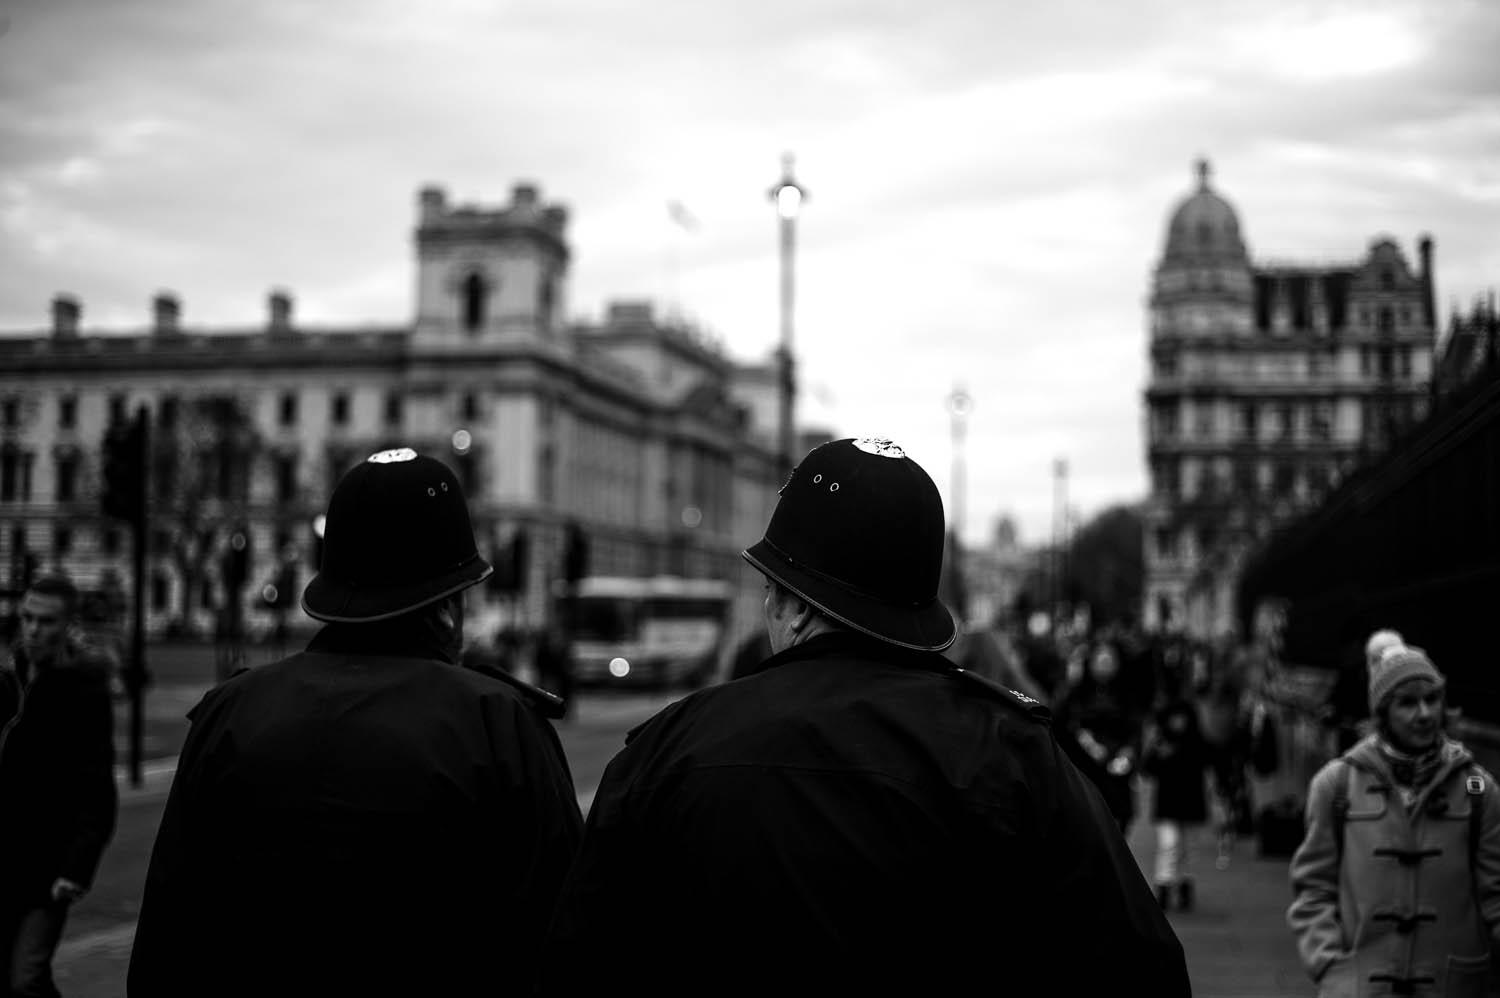 A pair of officers walking through London